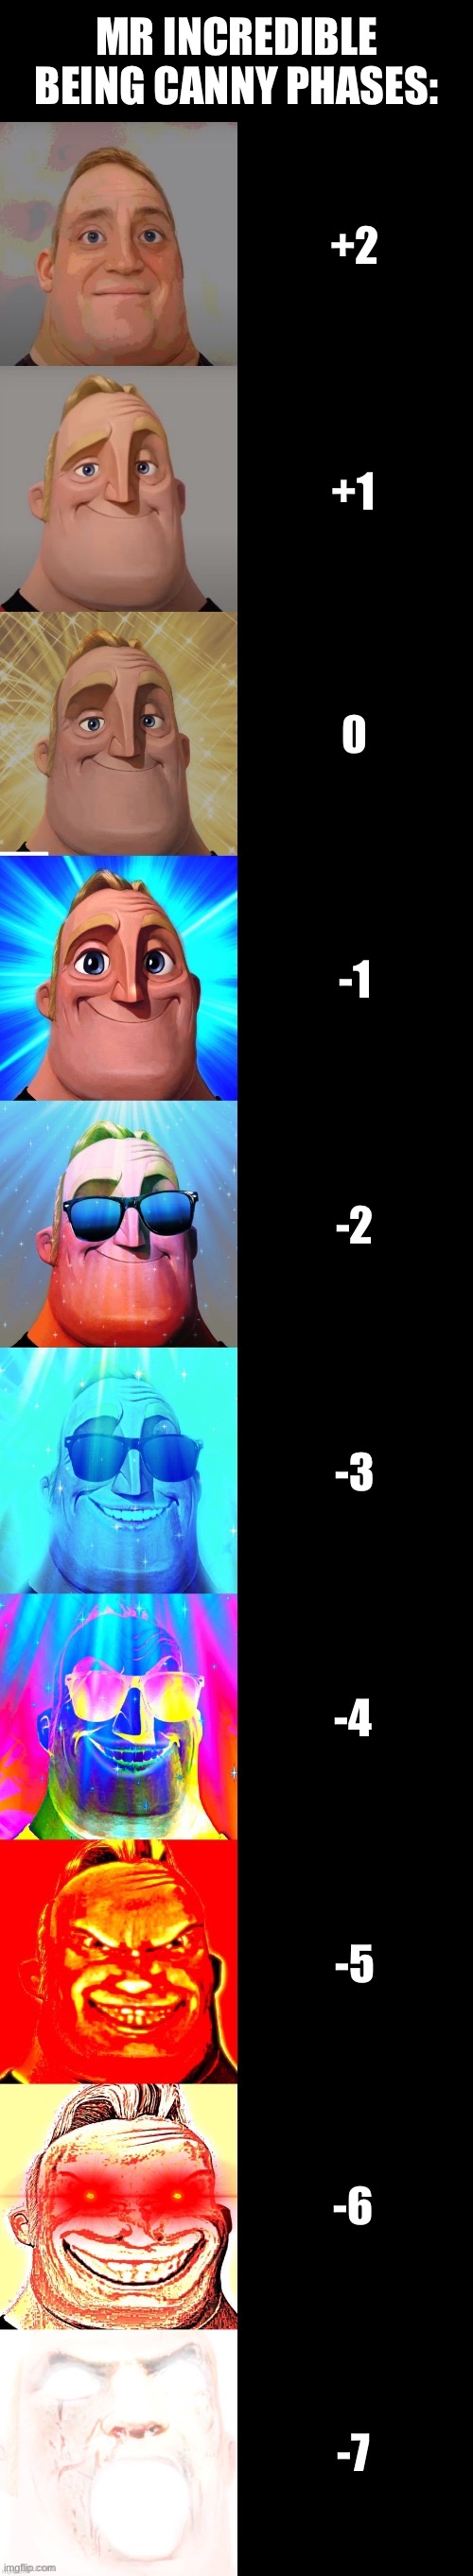 Mr. Incredible being canny phases | MR INCREDIBLE BEING CANNY PHASES:; +2; +1; -1; -2; -3; -4; -5; -6; -7 | image tagged in mr incredible becoming canny | made w/ Imgflip meme maker